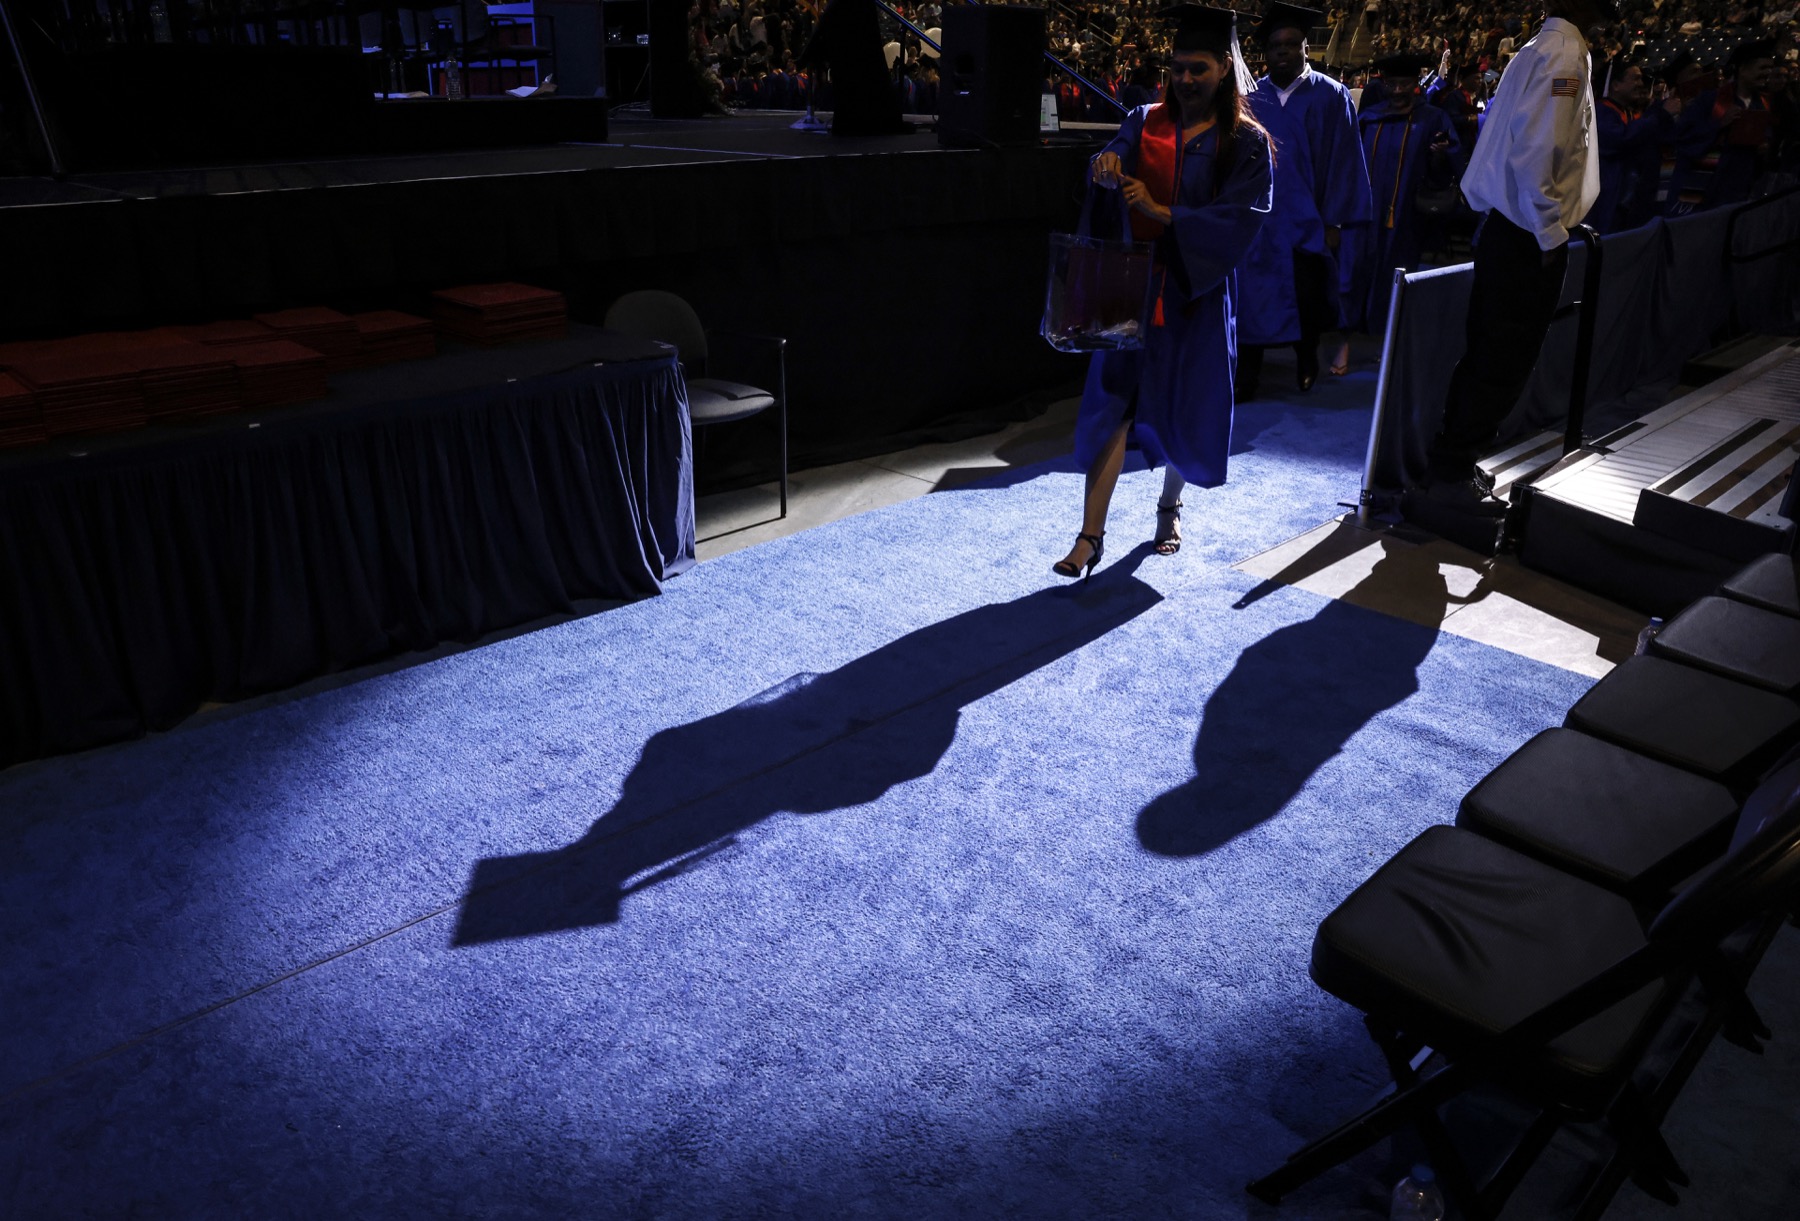 The last graduates of the first in-person commencement ceremonies since 2019 exit the Wintrust Area and enter the "real world."